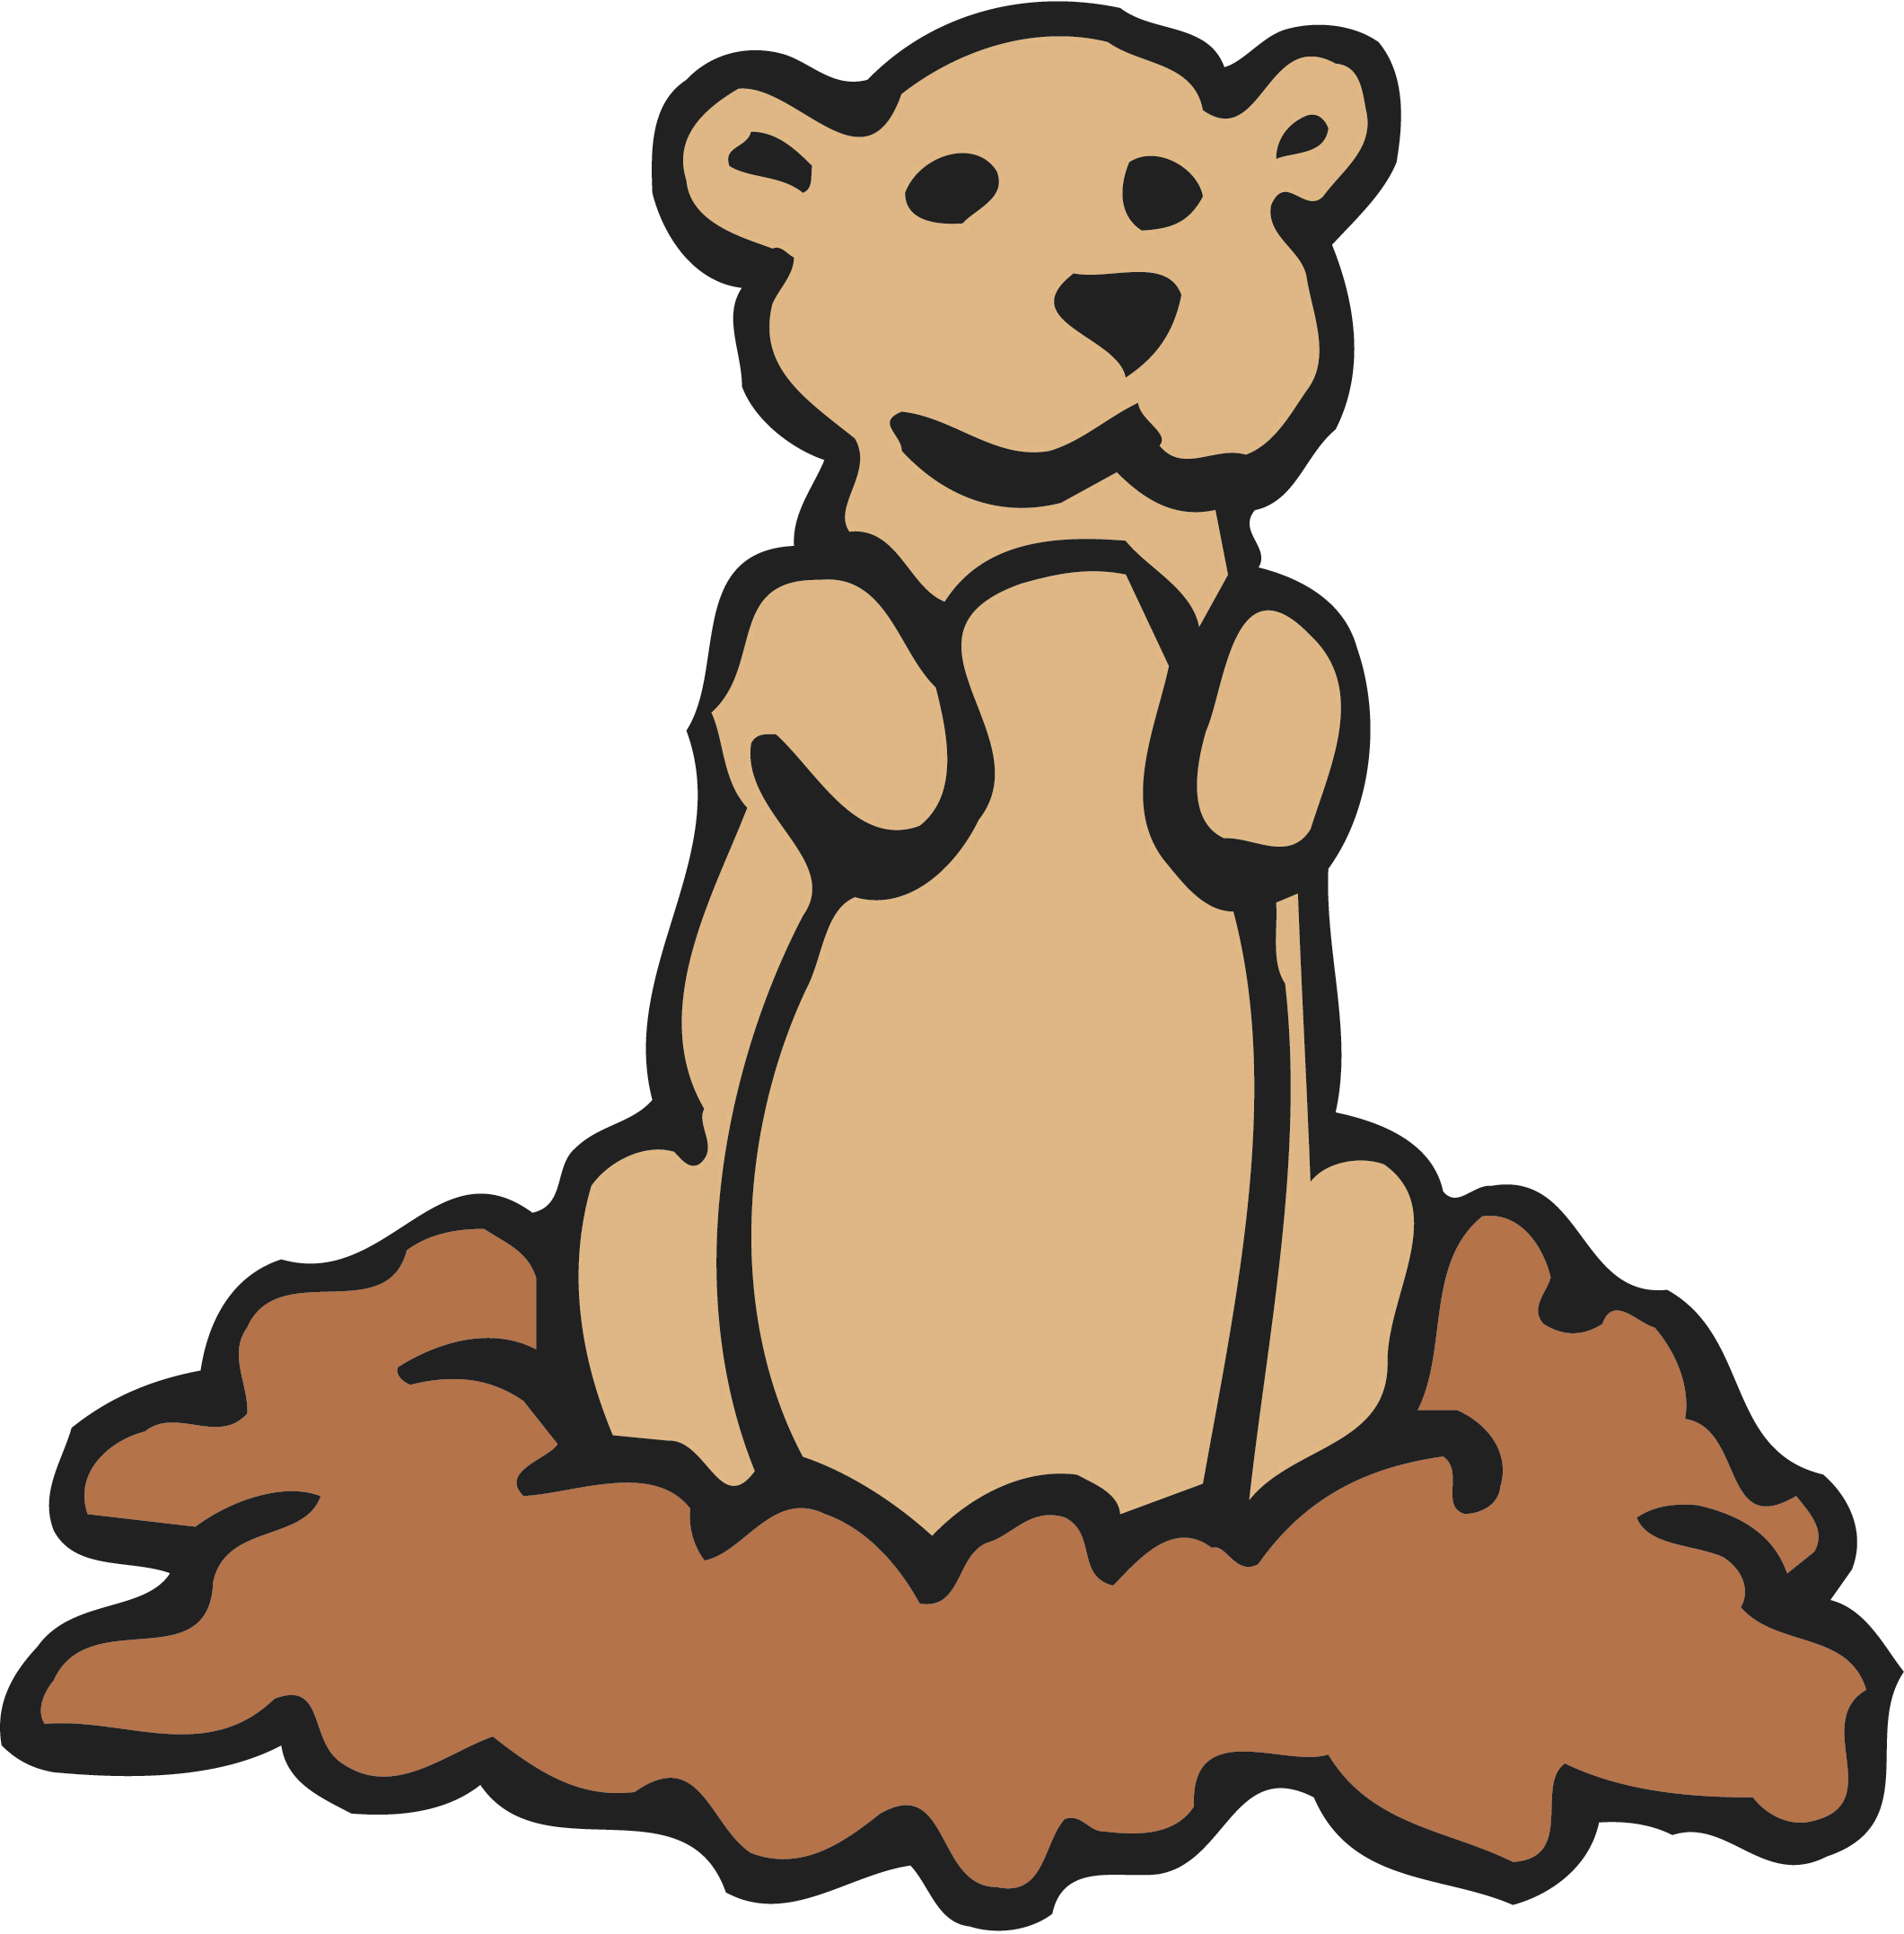 Groundhog 20clipart | Clipart Panda - Free Clipart Images